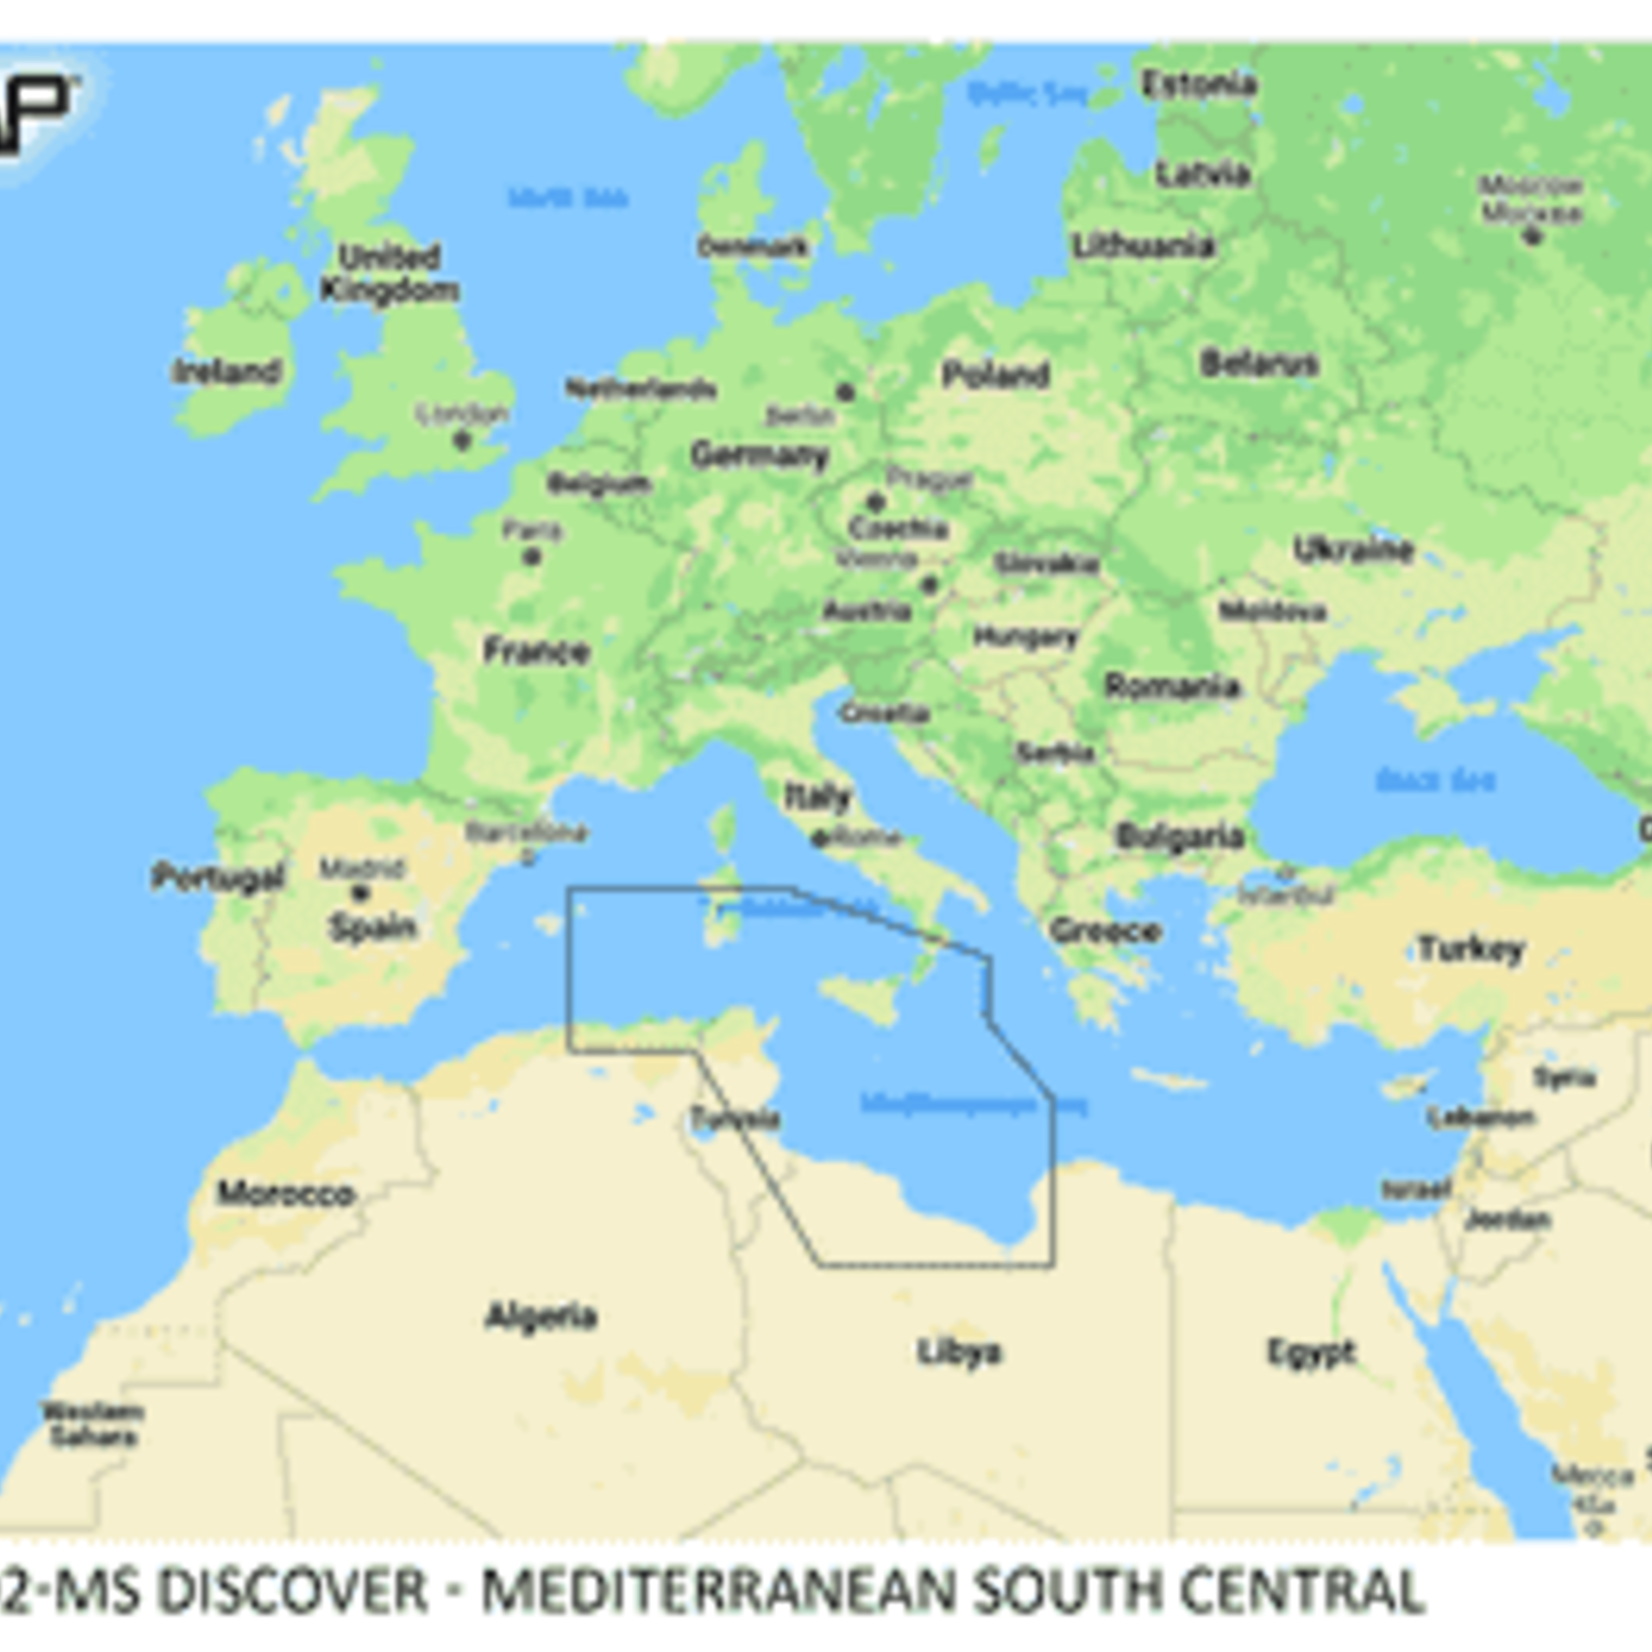 C-MAP DISCOVER - Mediterranean South Central